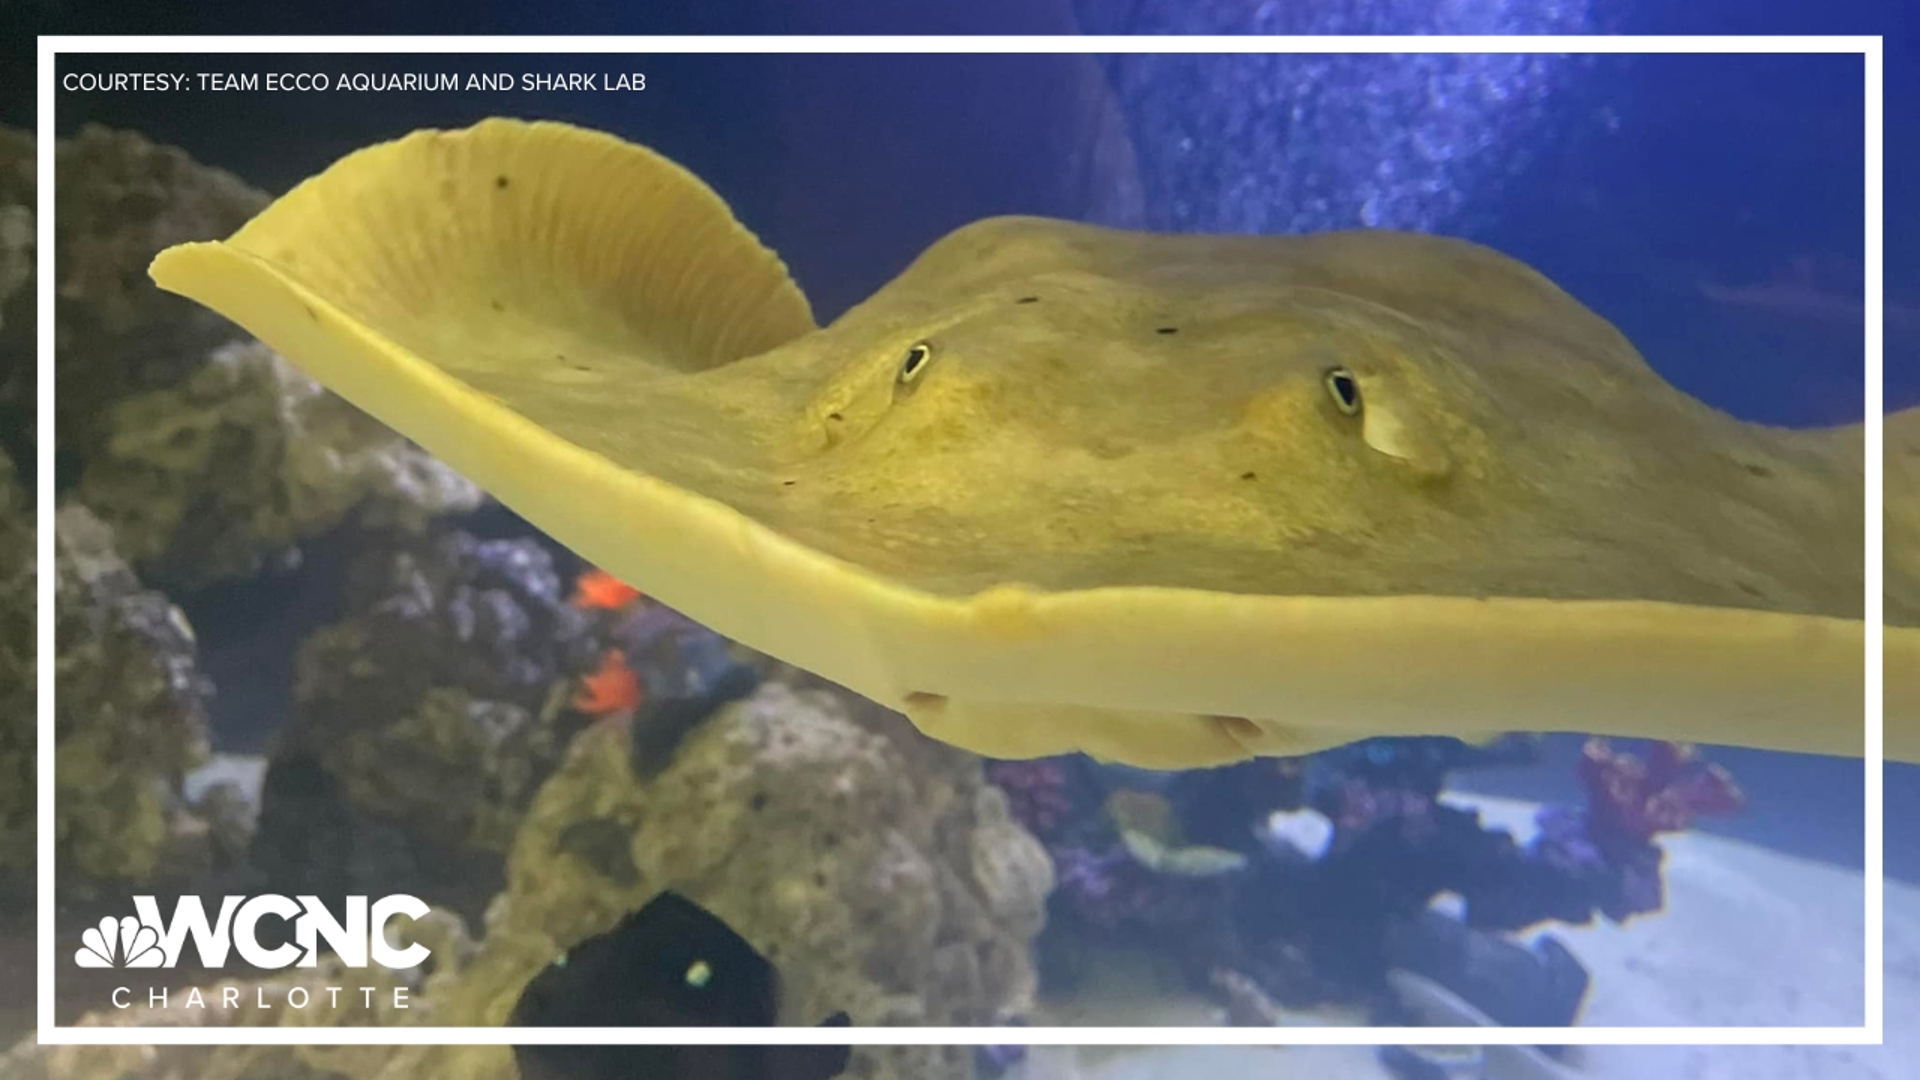 A strange twist in the story of a stingray that mysteriously got pregnant with no male stingrays in her tank.